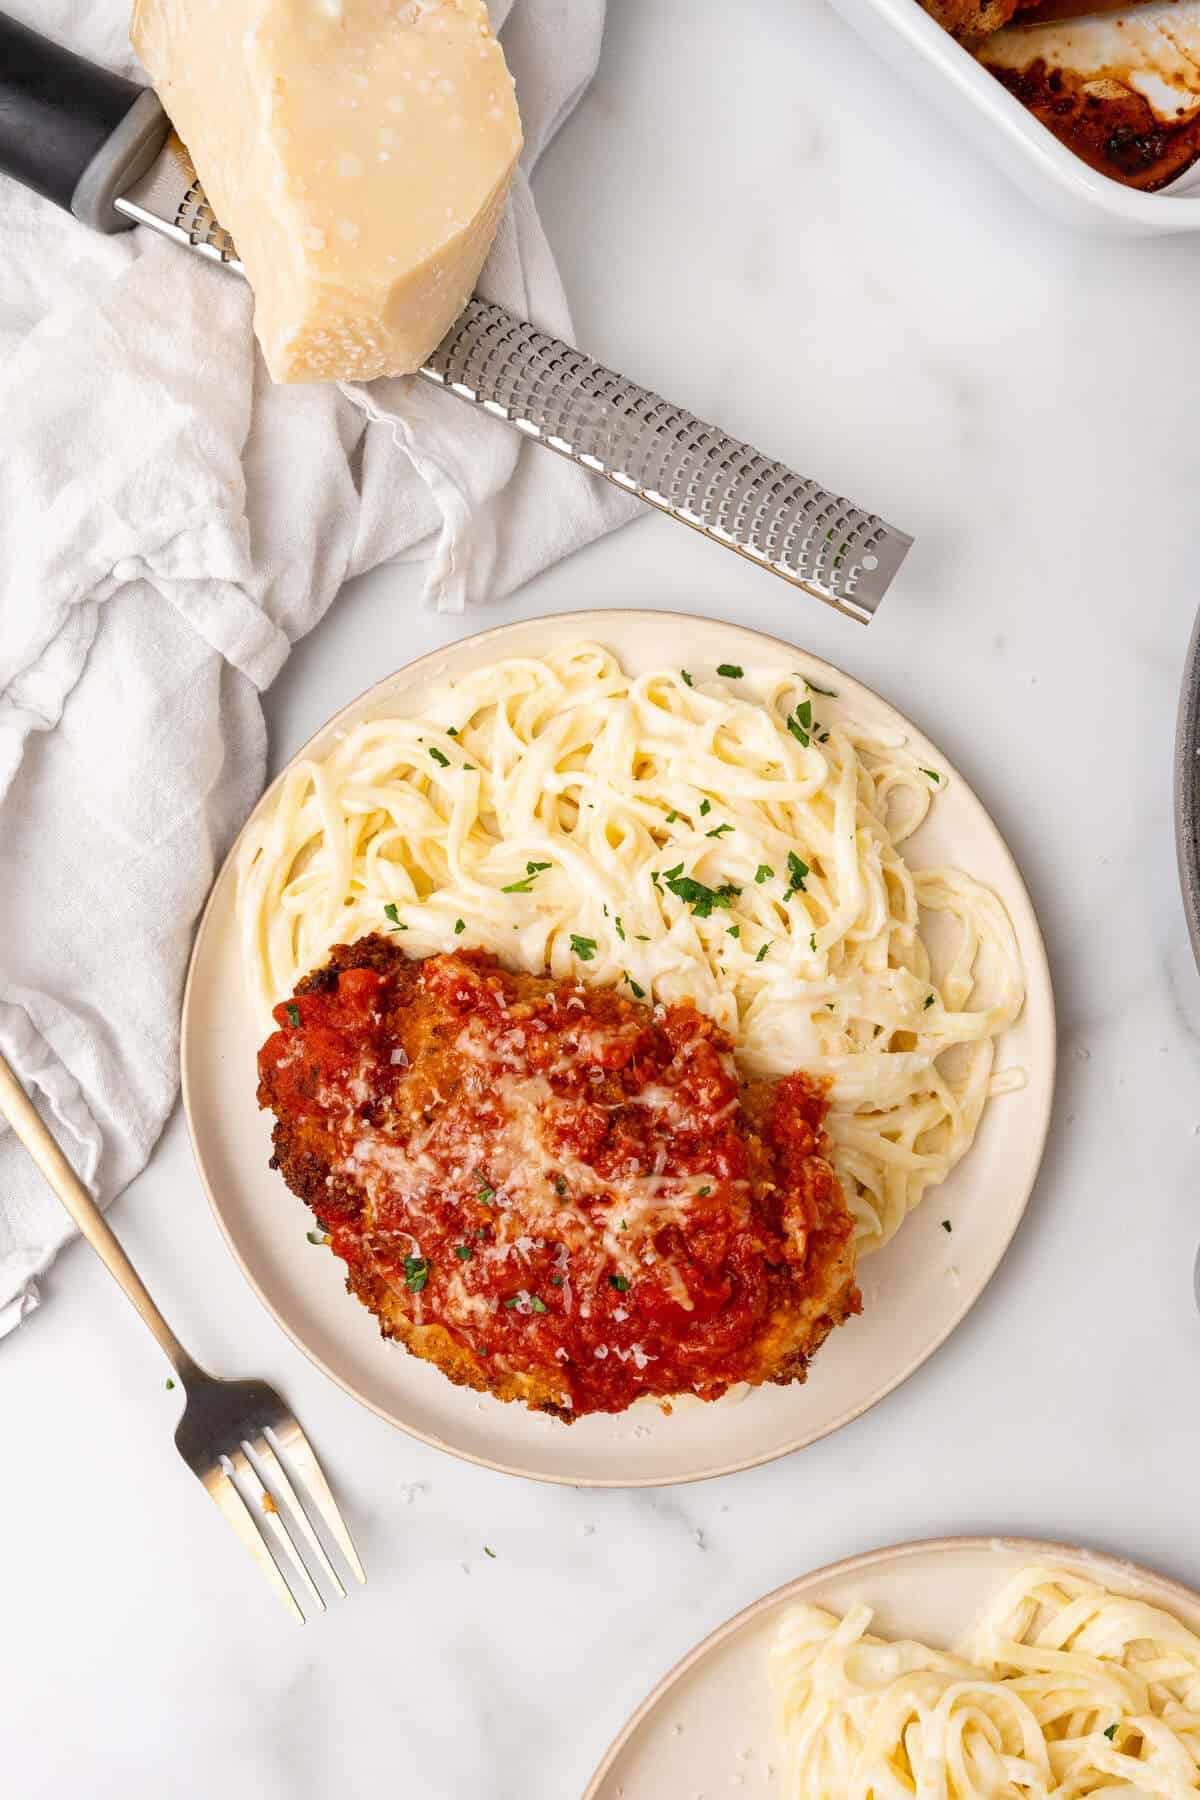 Plate of spaghetti with a Chicken Parmesan Alfredo cutlet and tomato sauce garnished with parsley, with a cheese grater and block of cheese in the background.